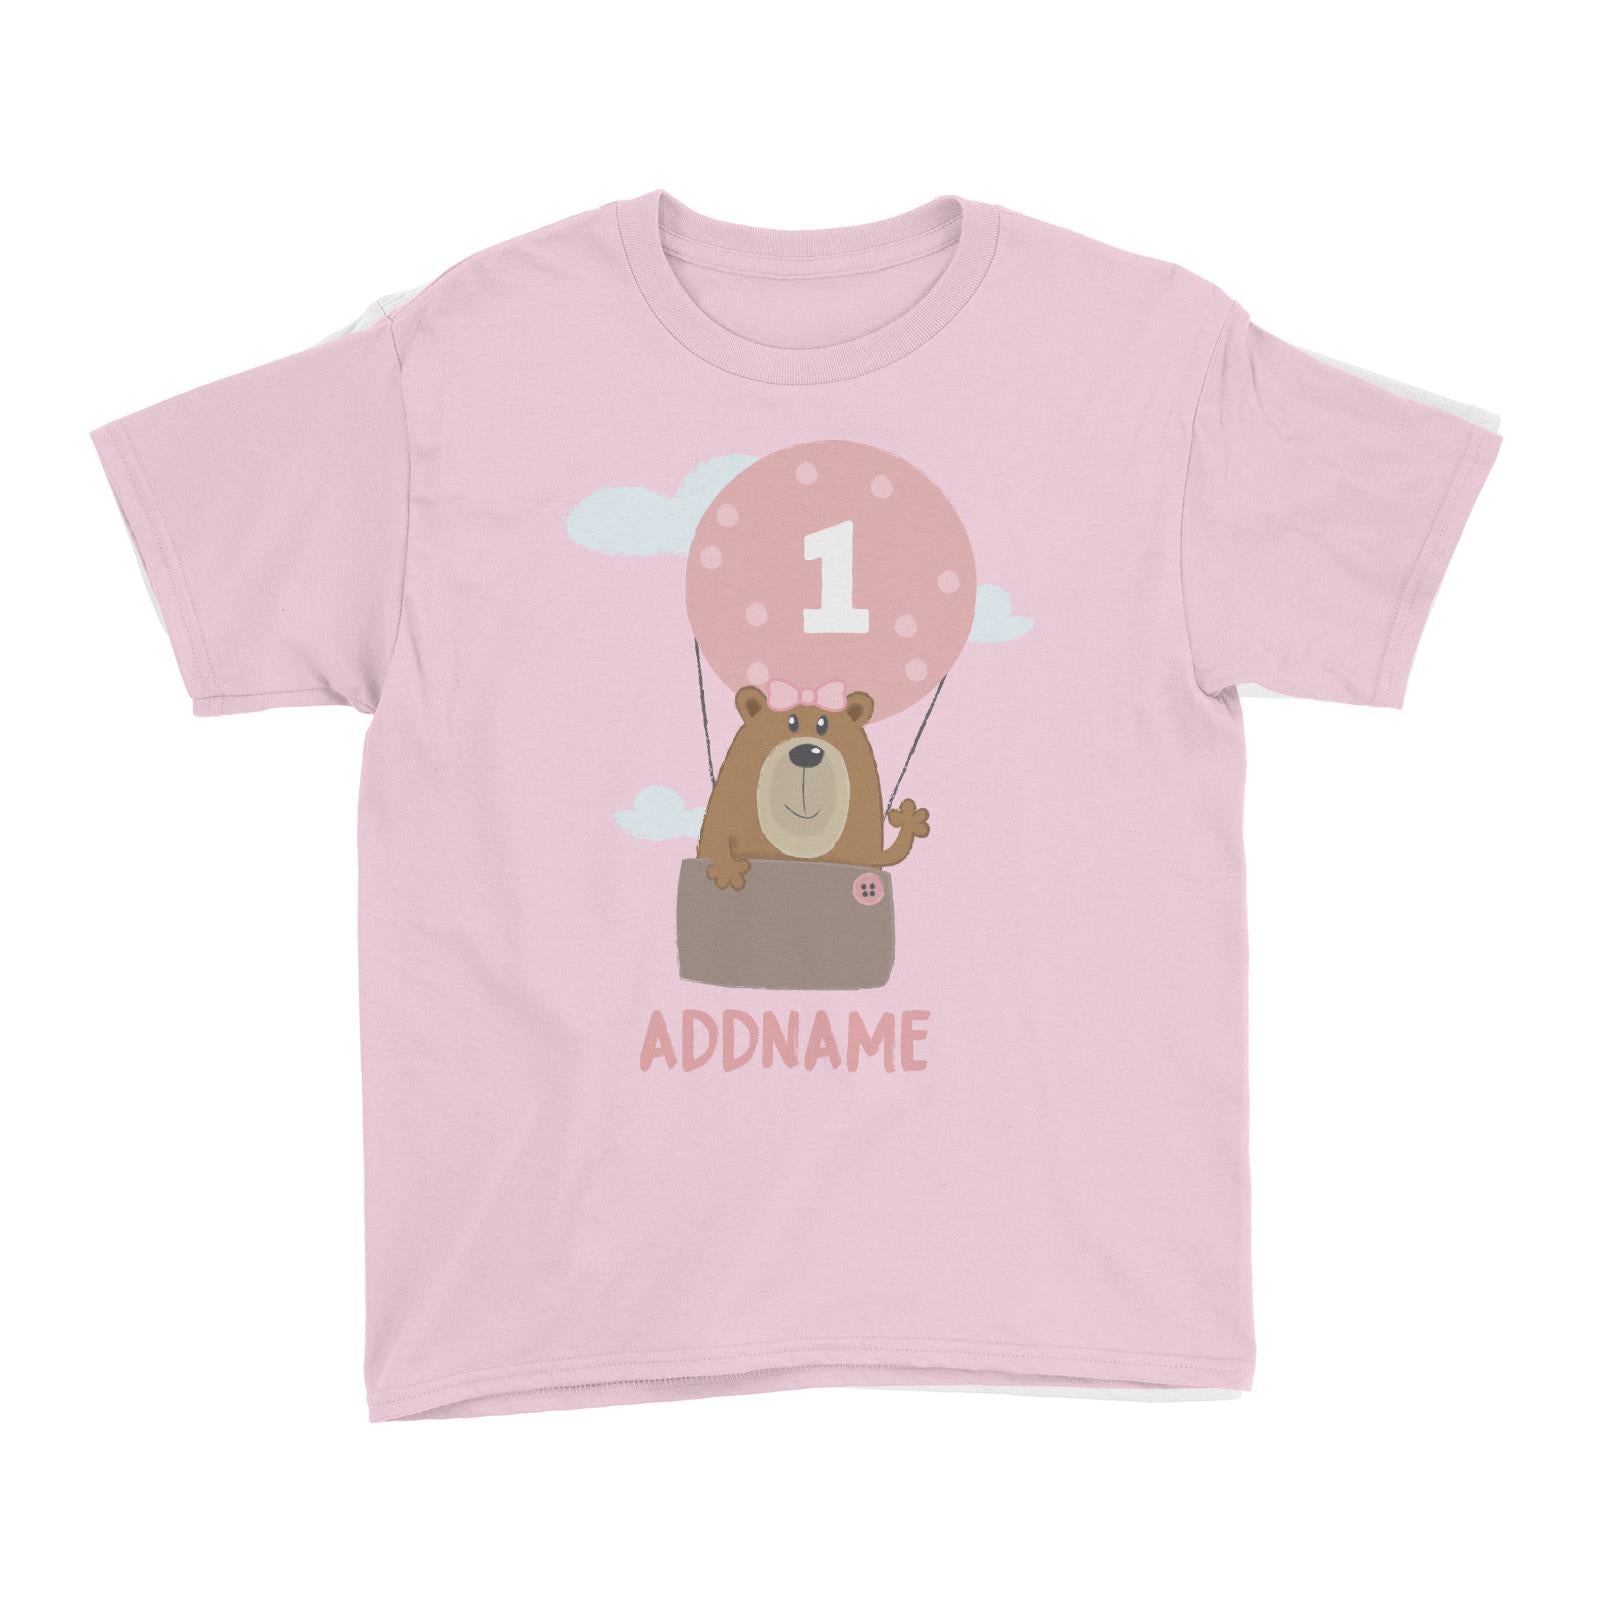 Cute Bear Girl with Hot Air Balloon Birthday Theme Personalizable with Name and Number Kid's T-Shirt